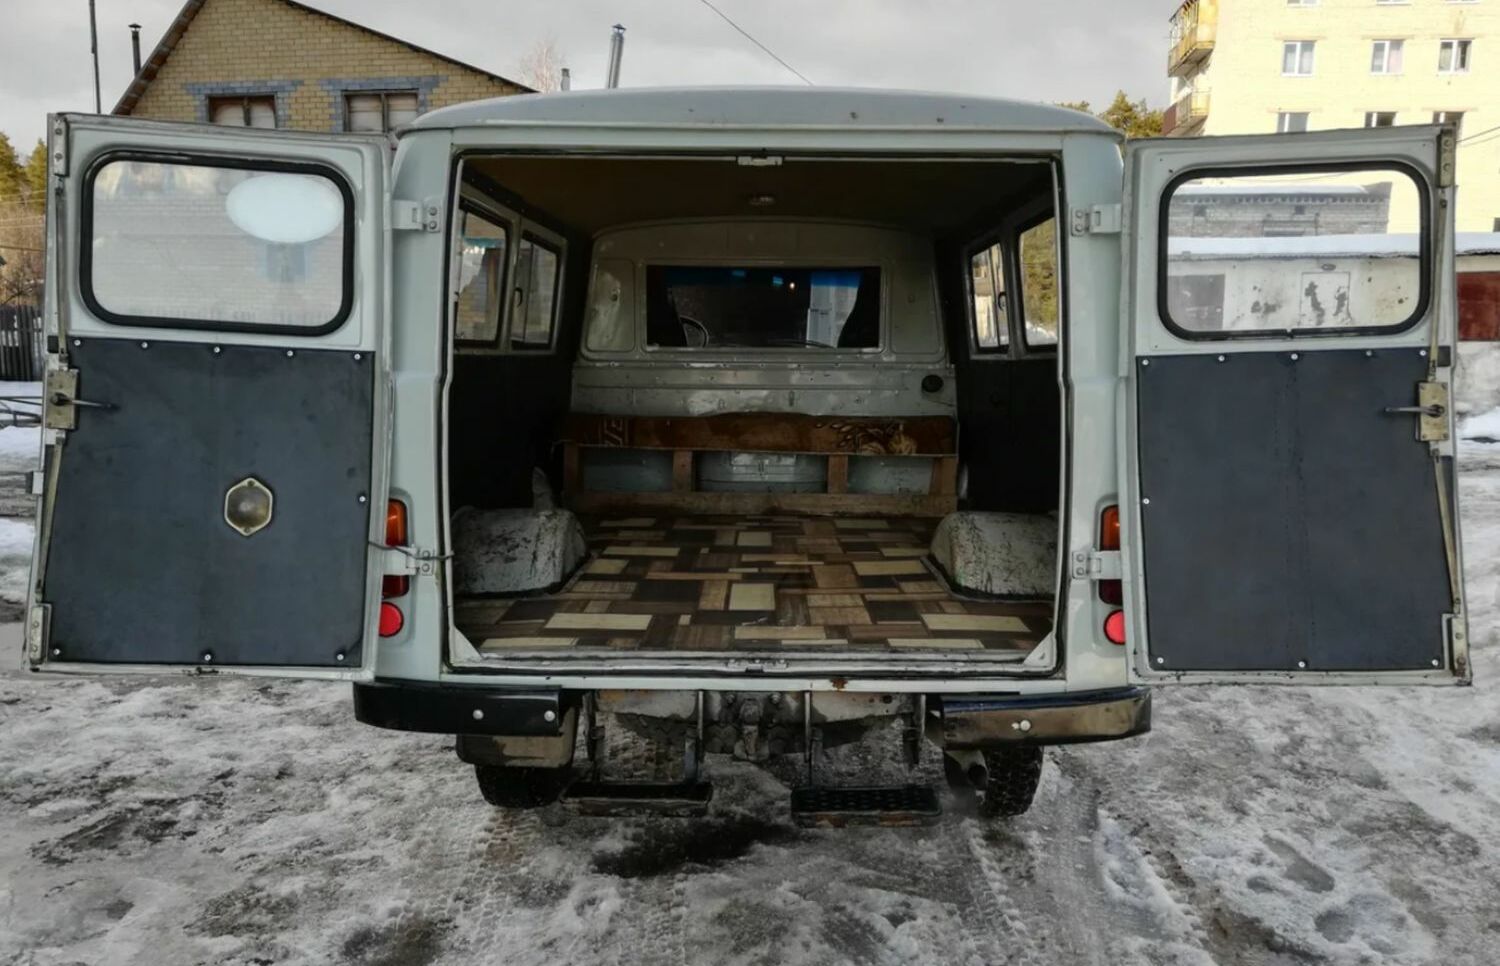 <span style="font-weight: bold;">Interiors of Retro UAZ 452 </span><br>